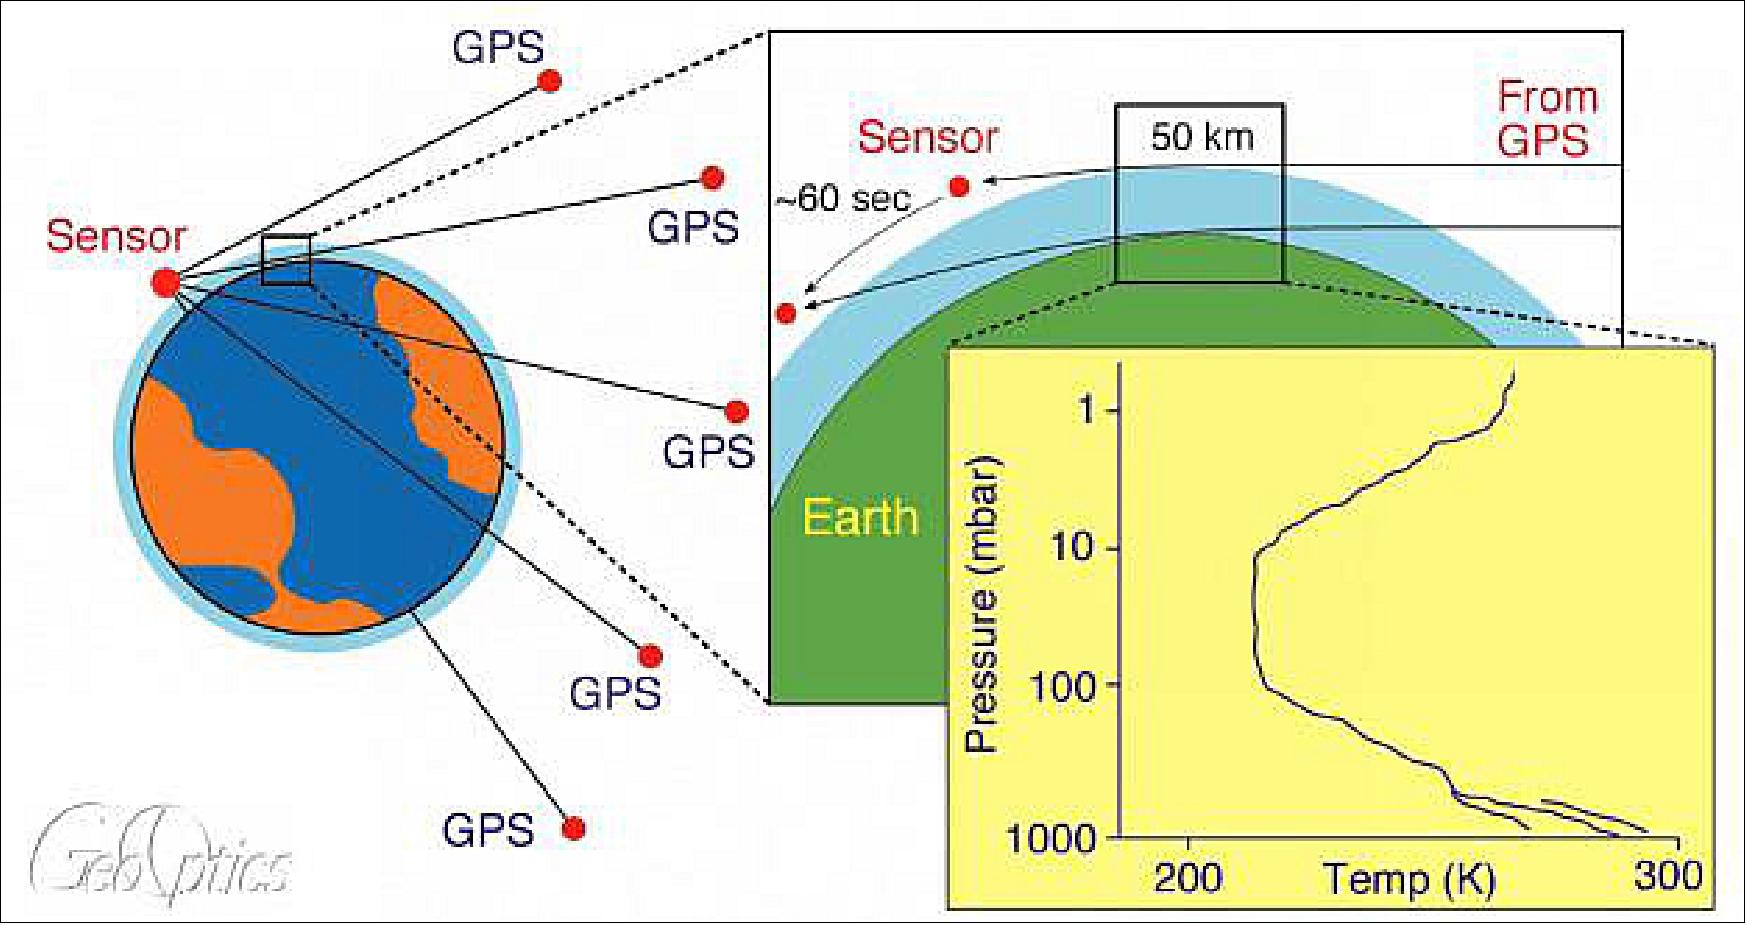 Figure 2: The GPS Radio Occultation instrument development emphasized an building an instrument of equal quality to previous instruments (image credit: GeoOptics, Tyvak)